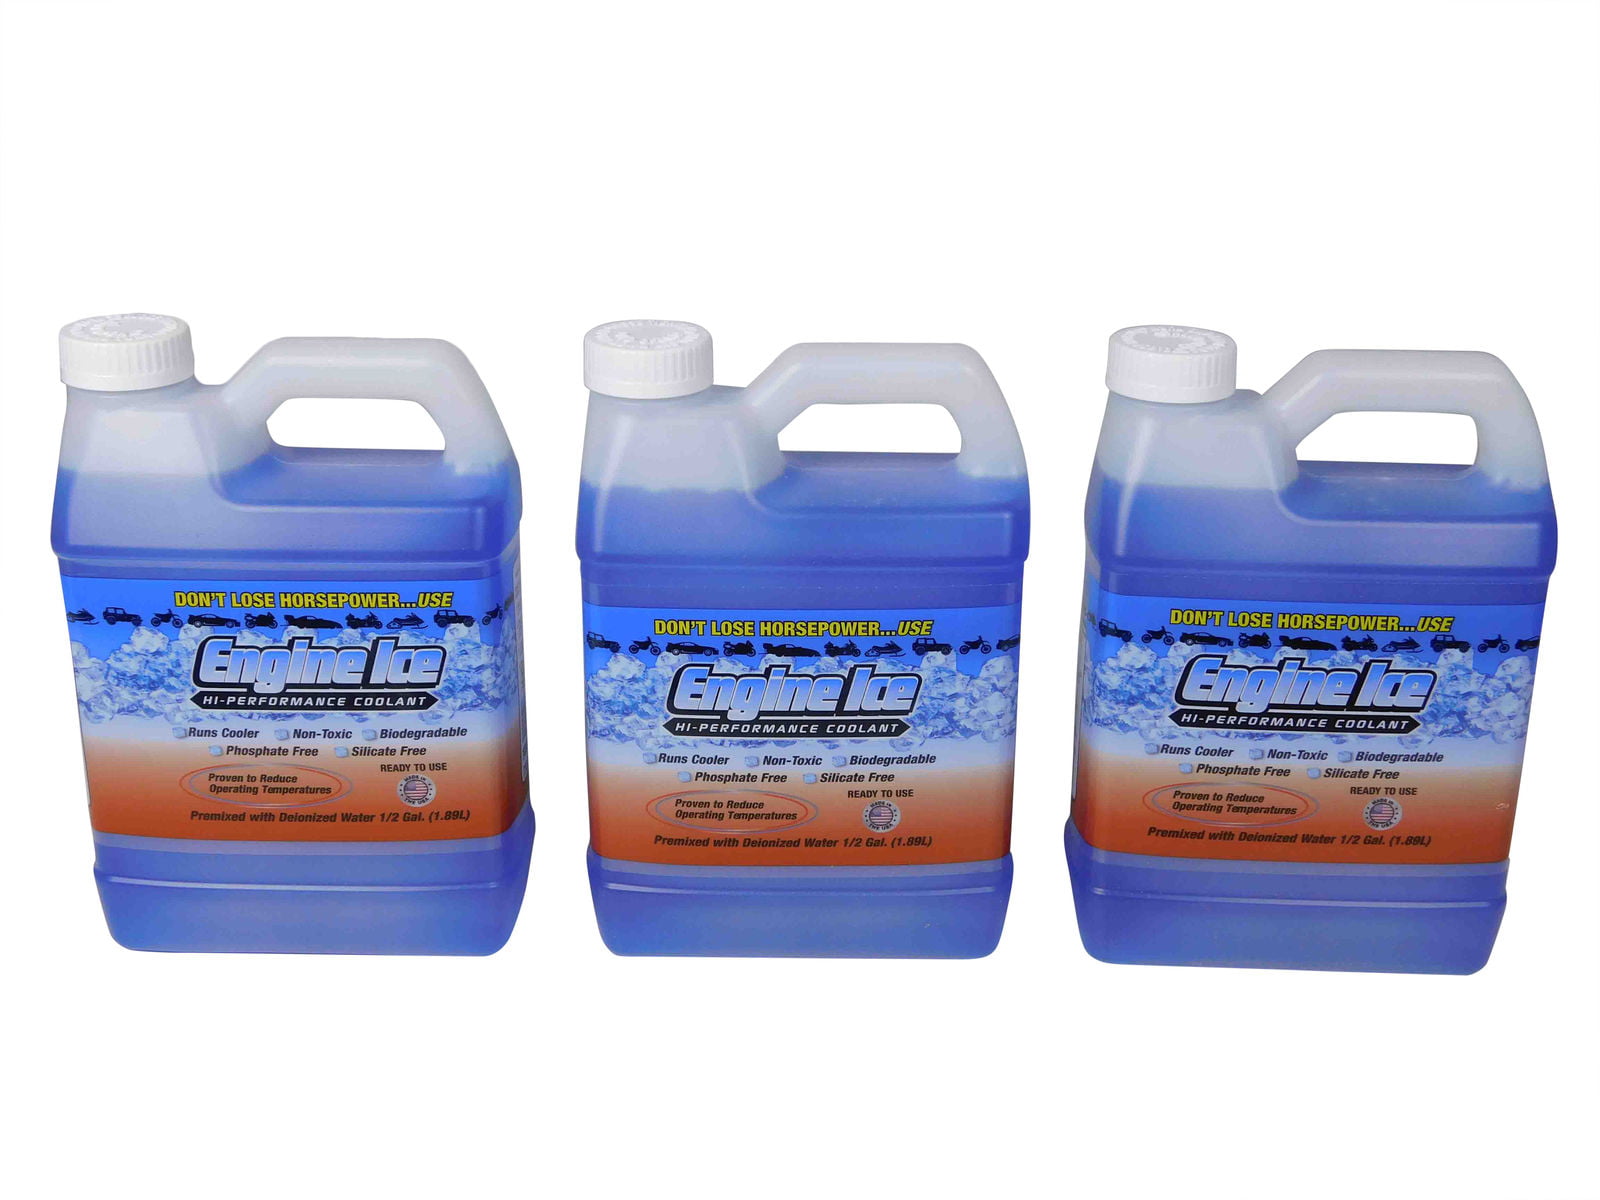 Engine Ice 1/2 Gal Hi-Performance Non-Toxic TYDS008 Coolant 64oz - 3 Pack